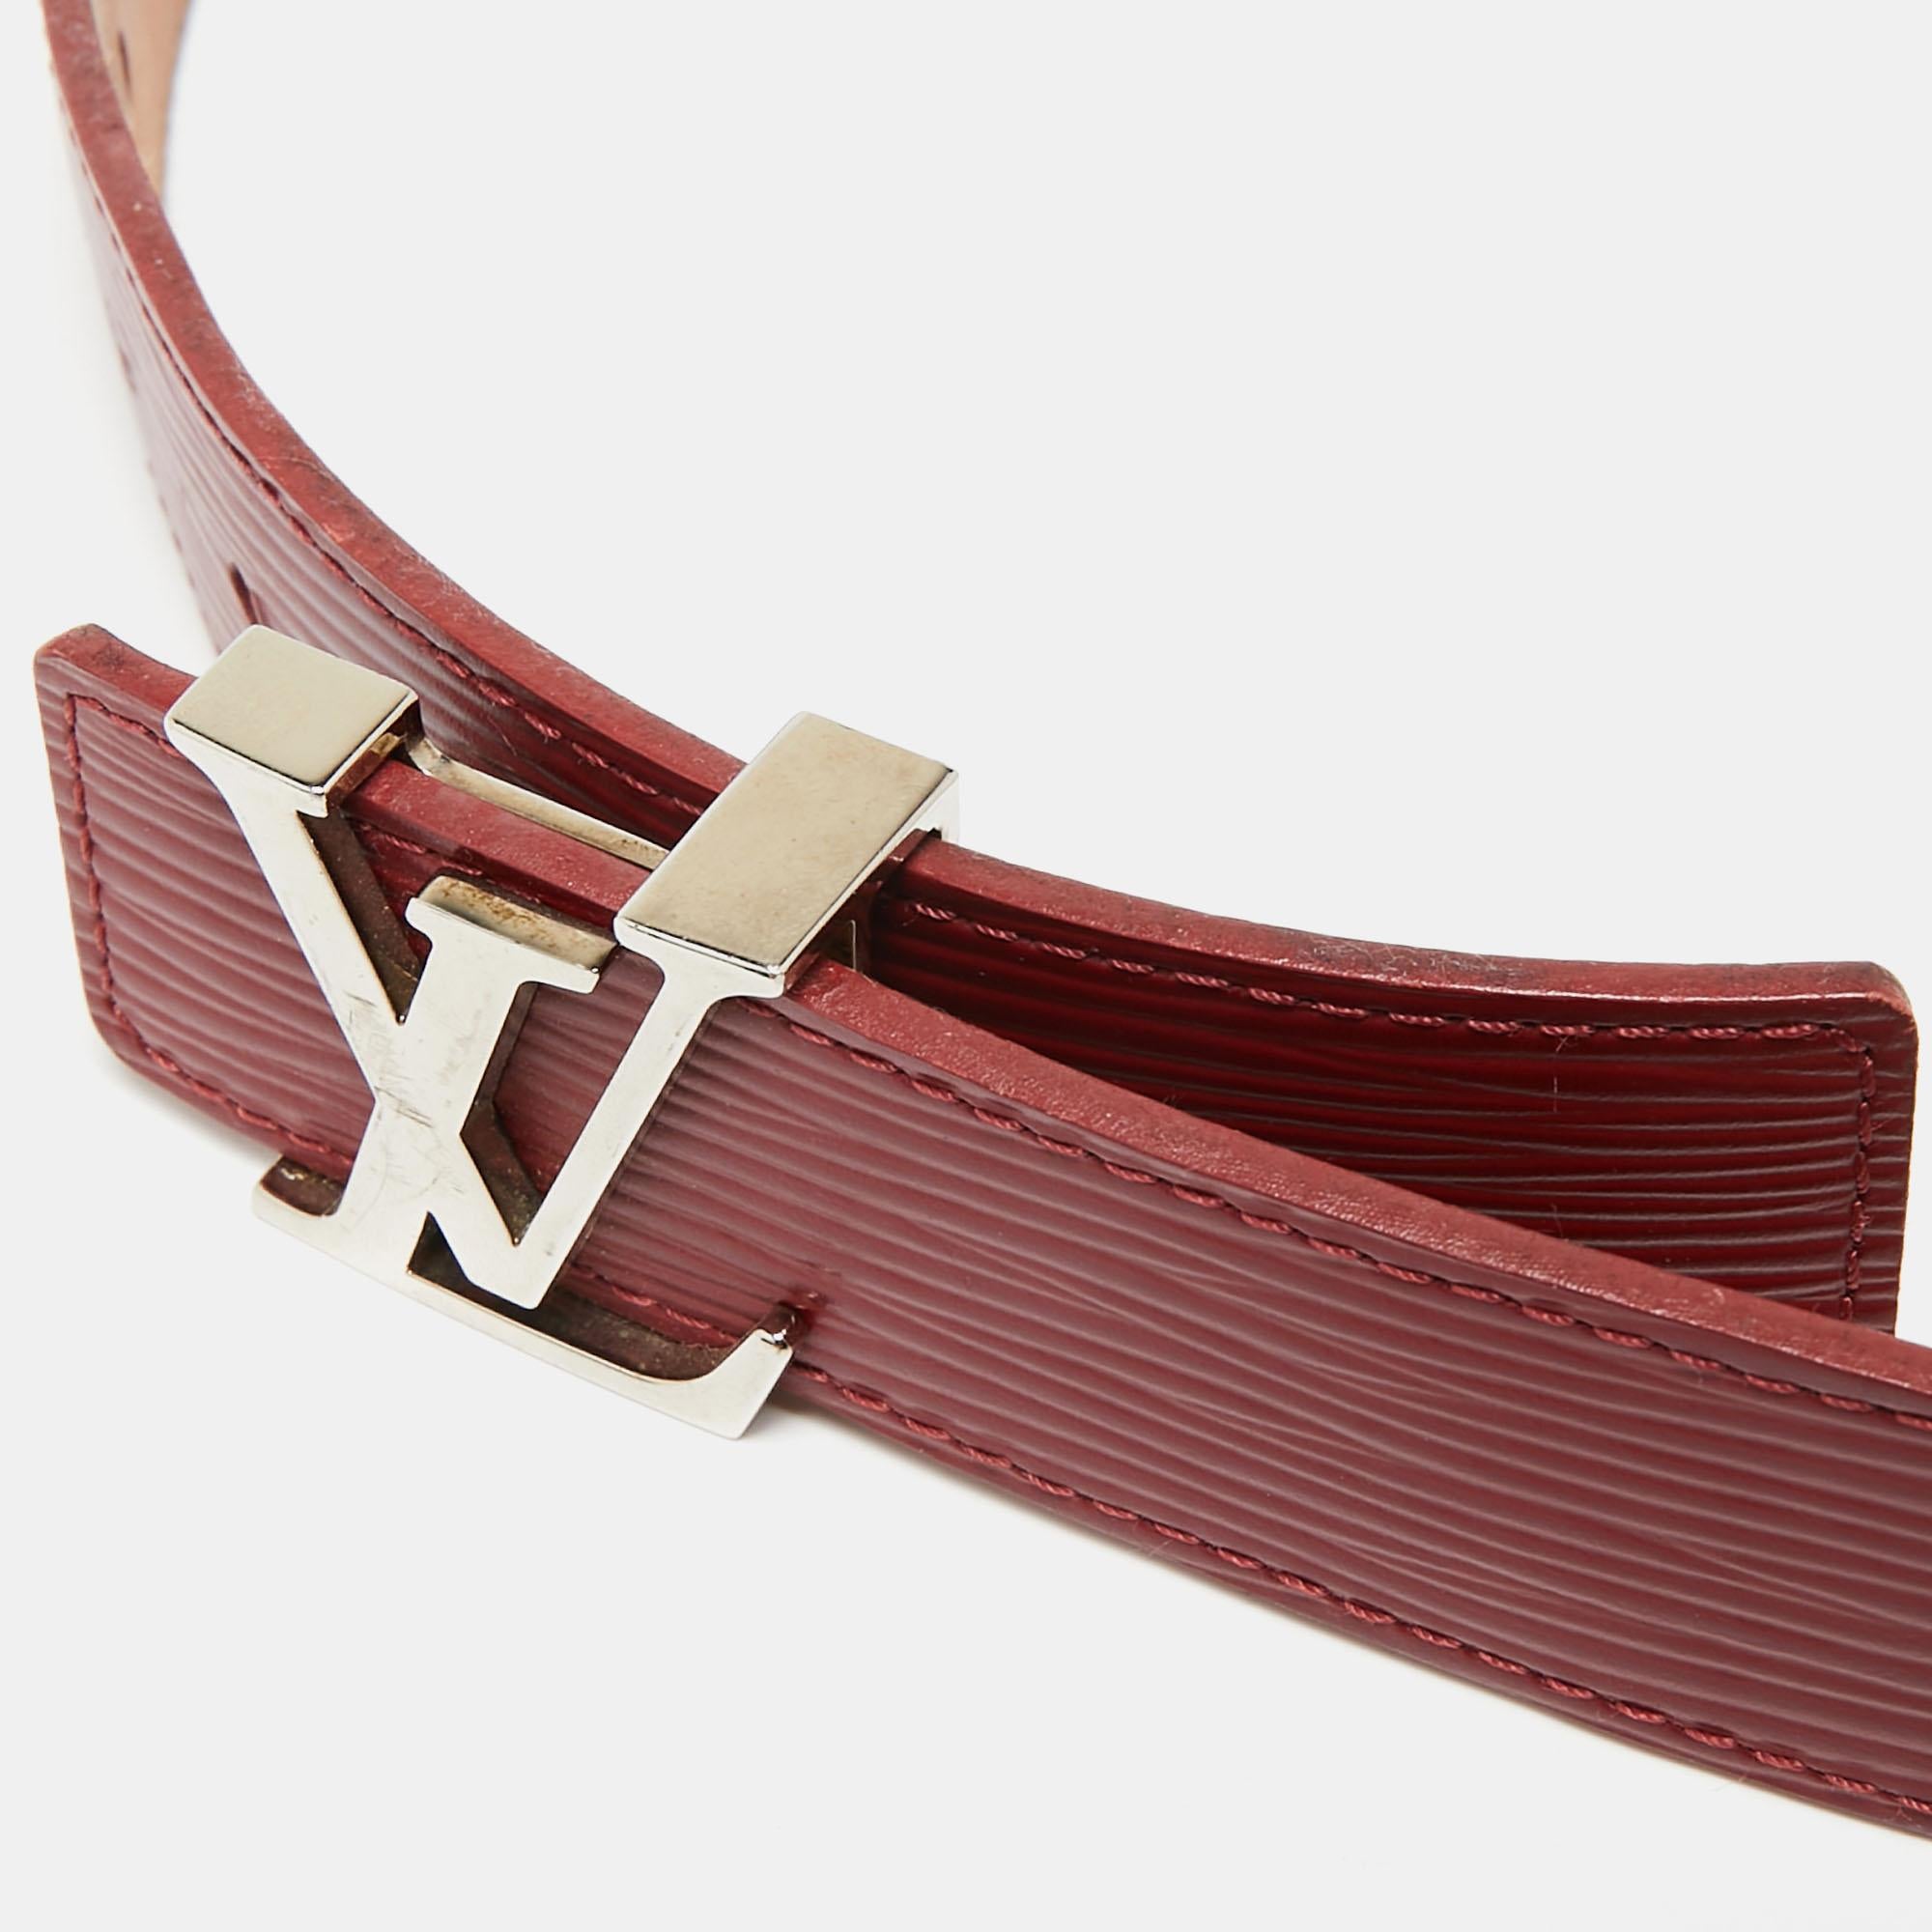 This Initiales belt from Louis Vuitton is simple in design but nevertheless quite appealing. The epi leather belt has silver-tone hardware in the form of the enlarged iconic LV symbol and the brand name is also engraved on the backside.

